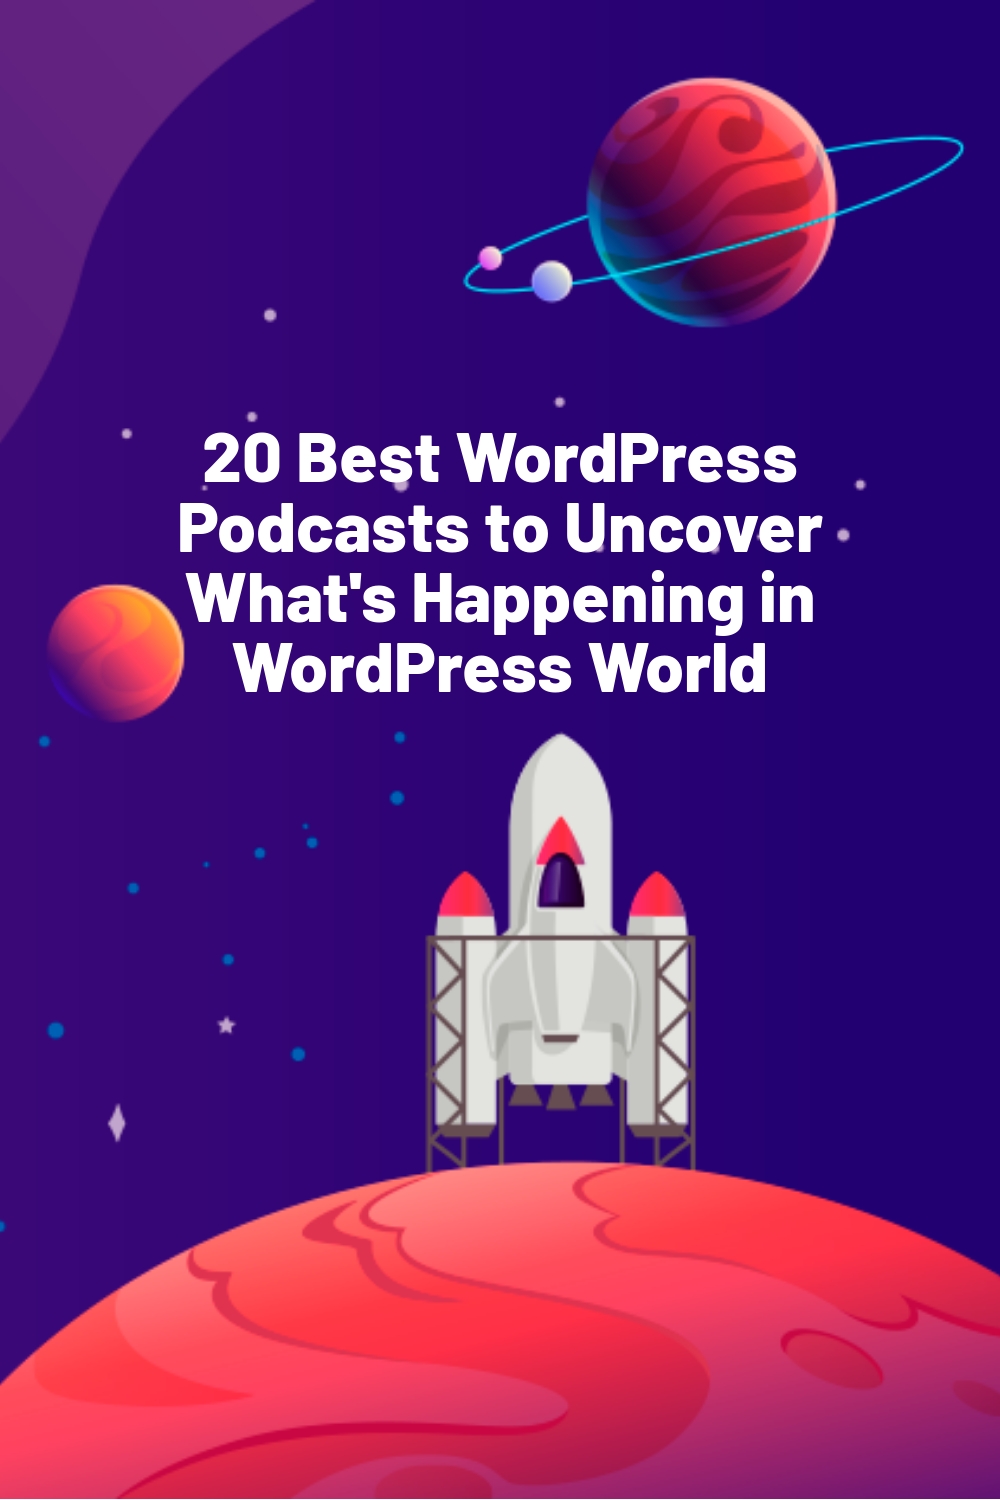 20 Best WordPress Podcasts to Uncover What’s Happening in WordPress World